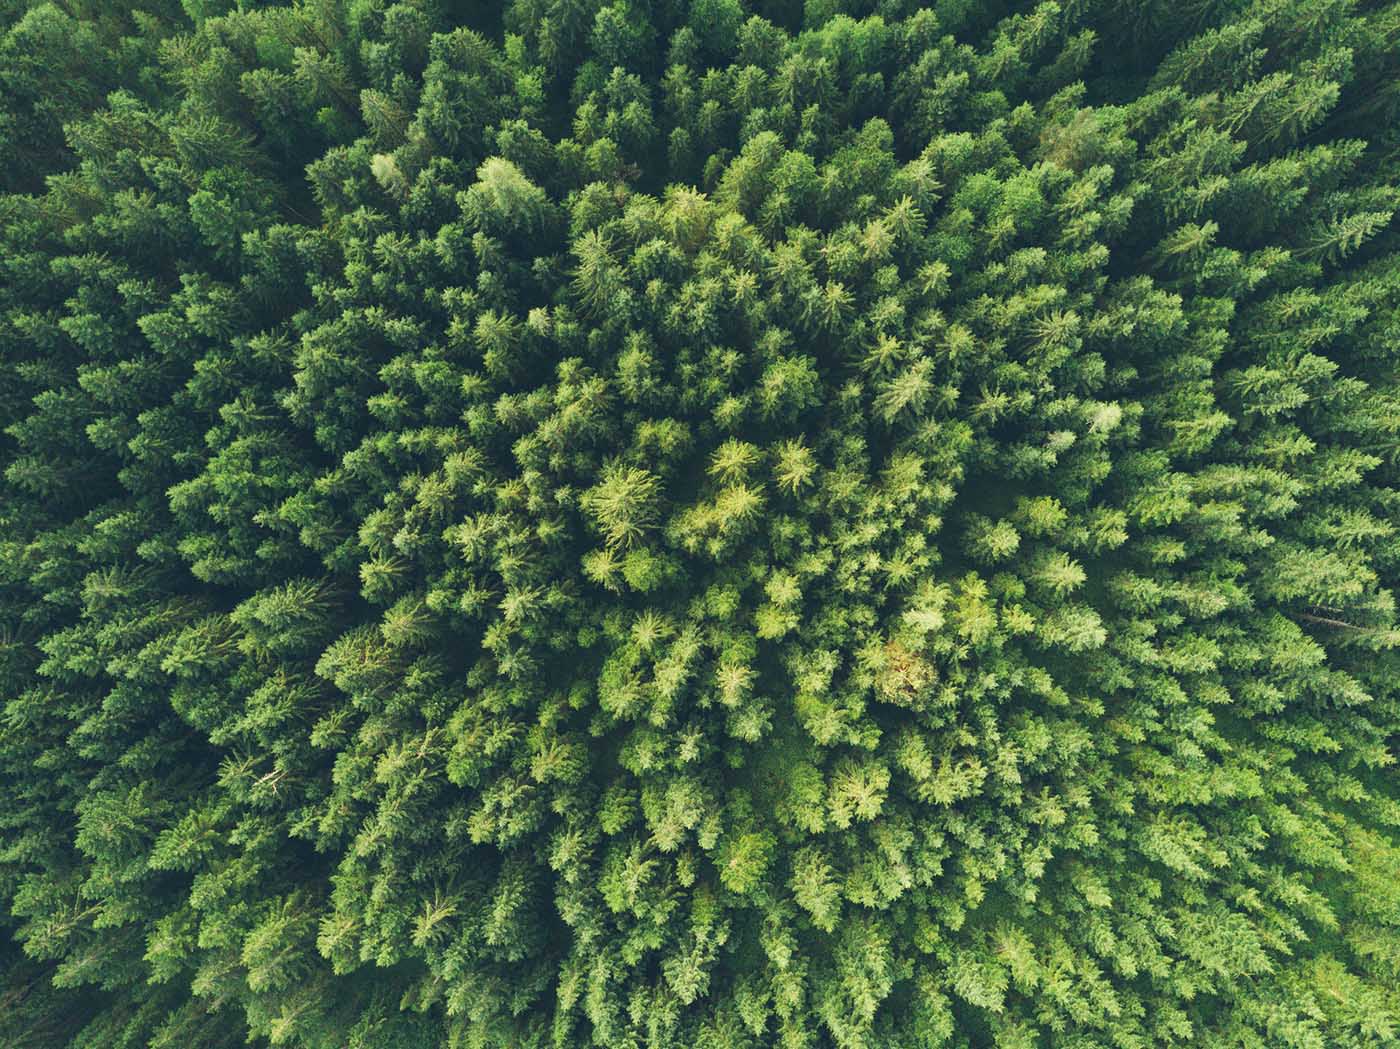 Photo of a forest from the sky by John O'Nolan on Unsplash.